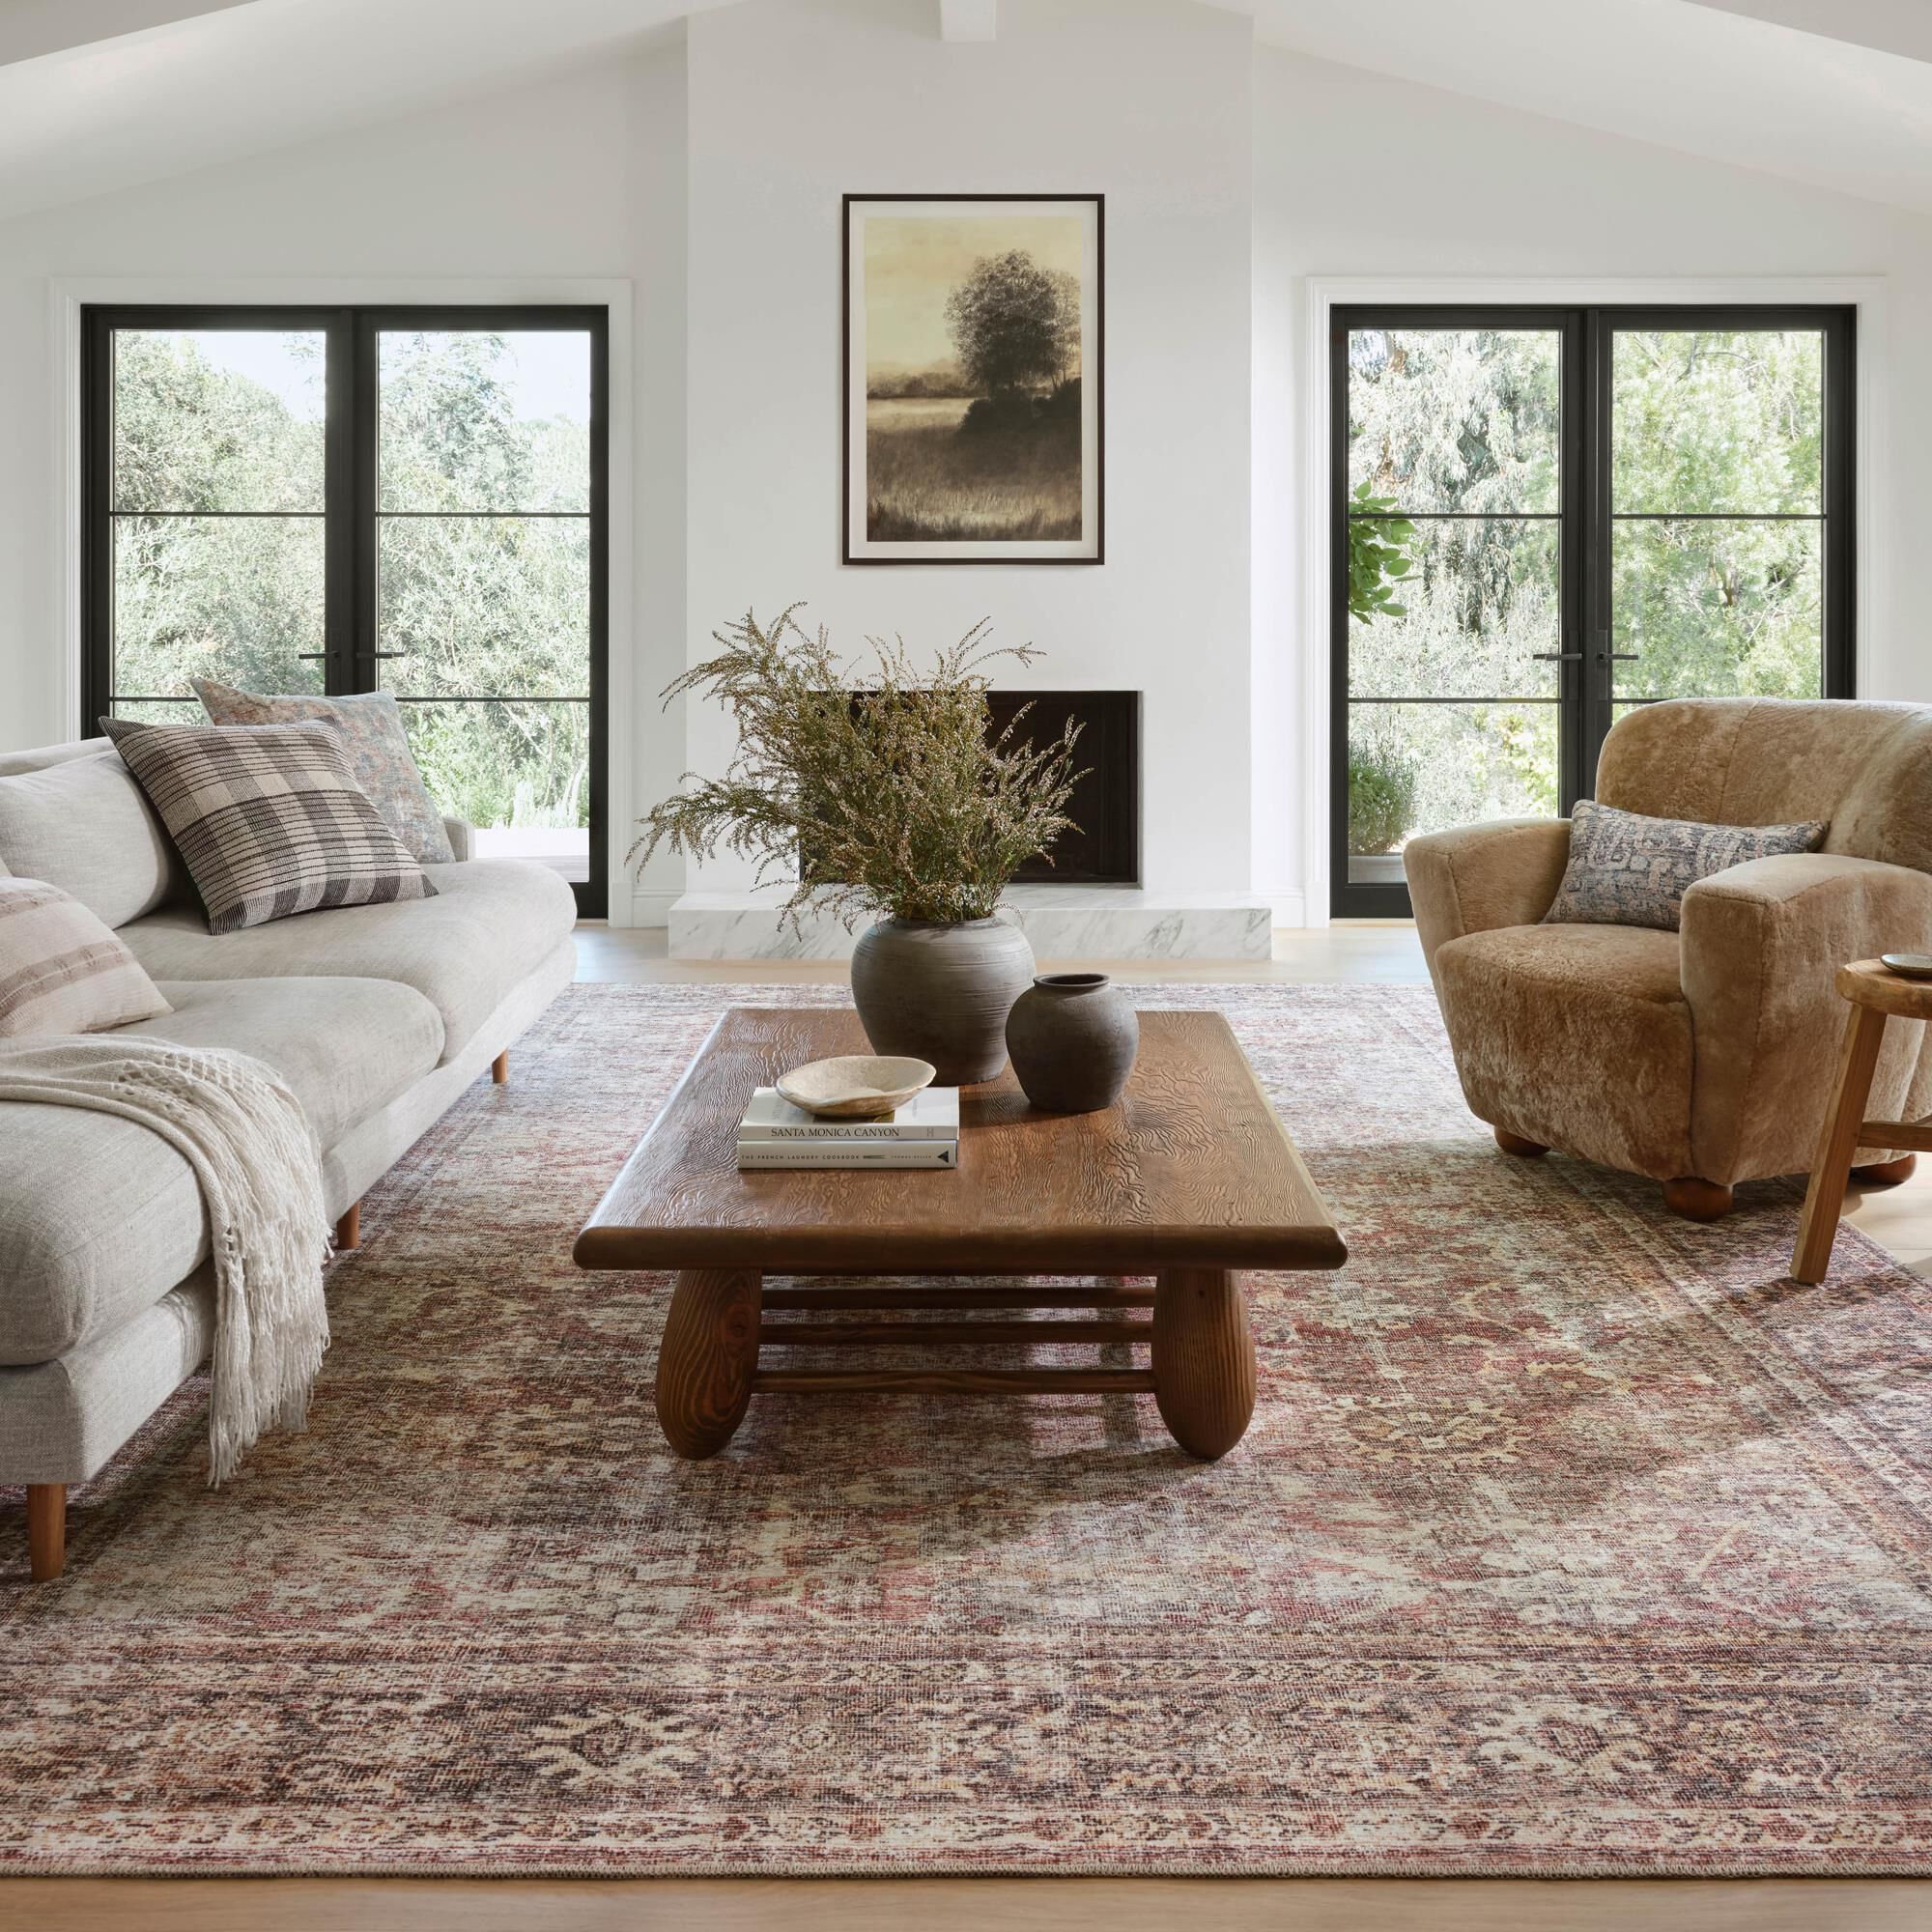 Choosing the right loloi rugs for all the
rooms in your home